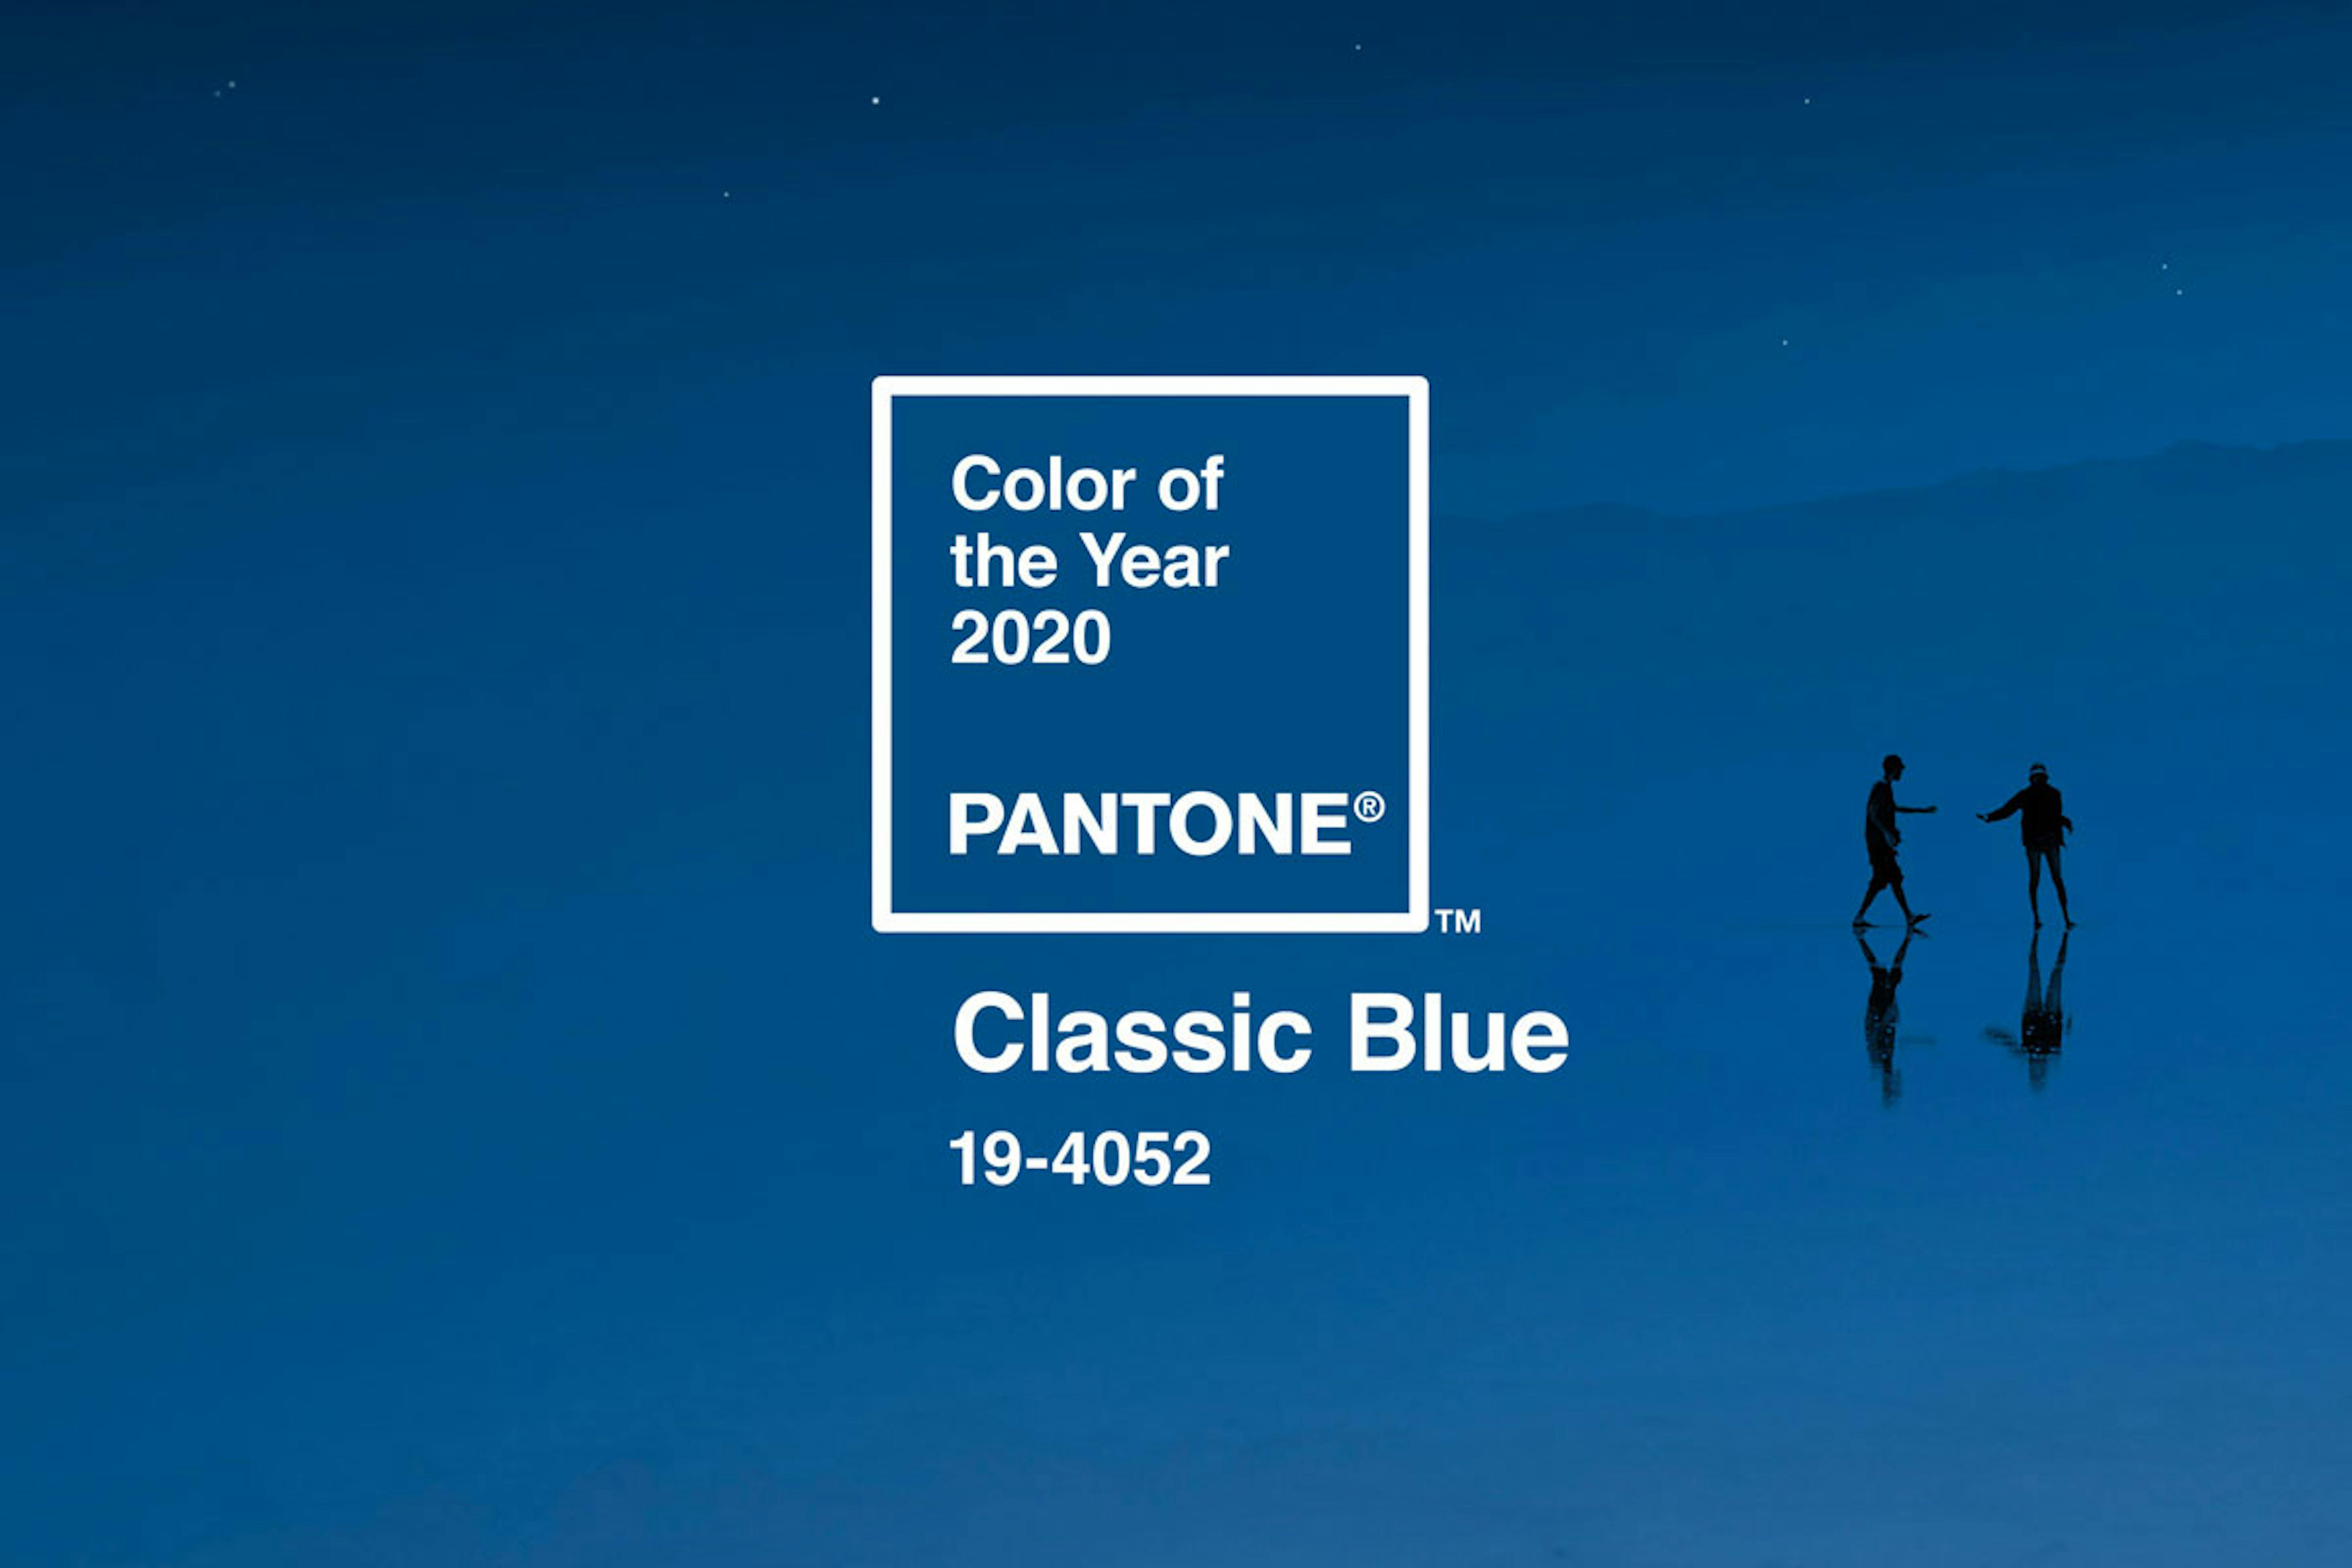 Pantones colour of the year 2020 - Classic Blue